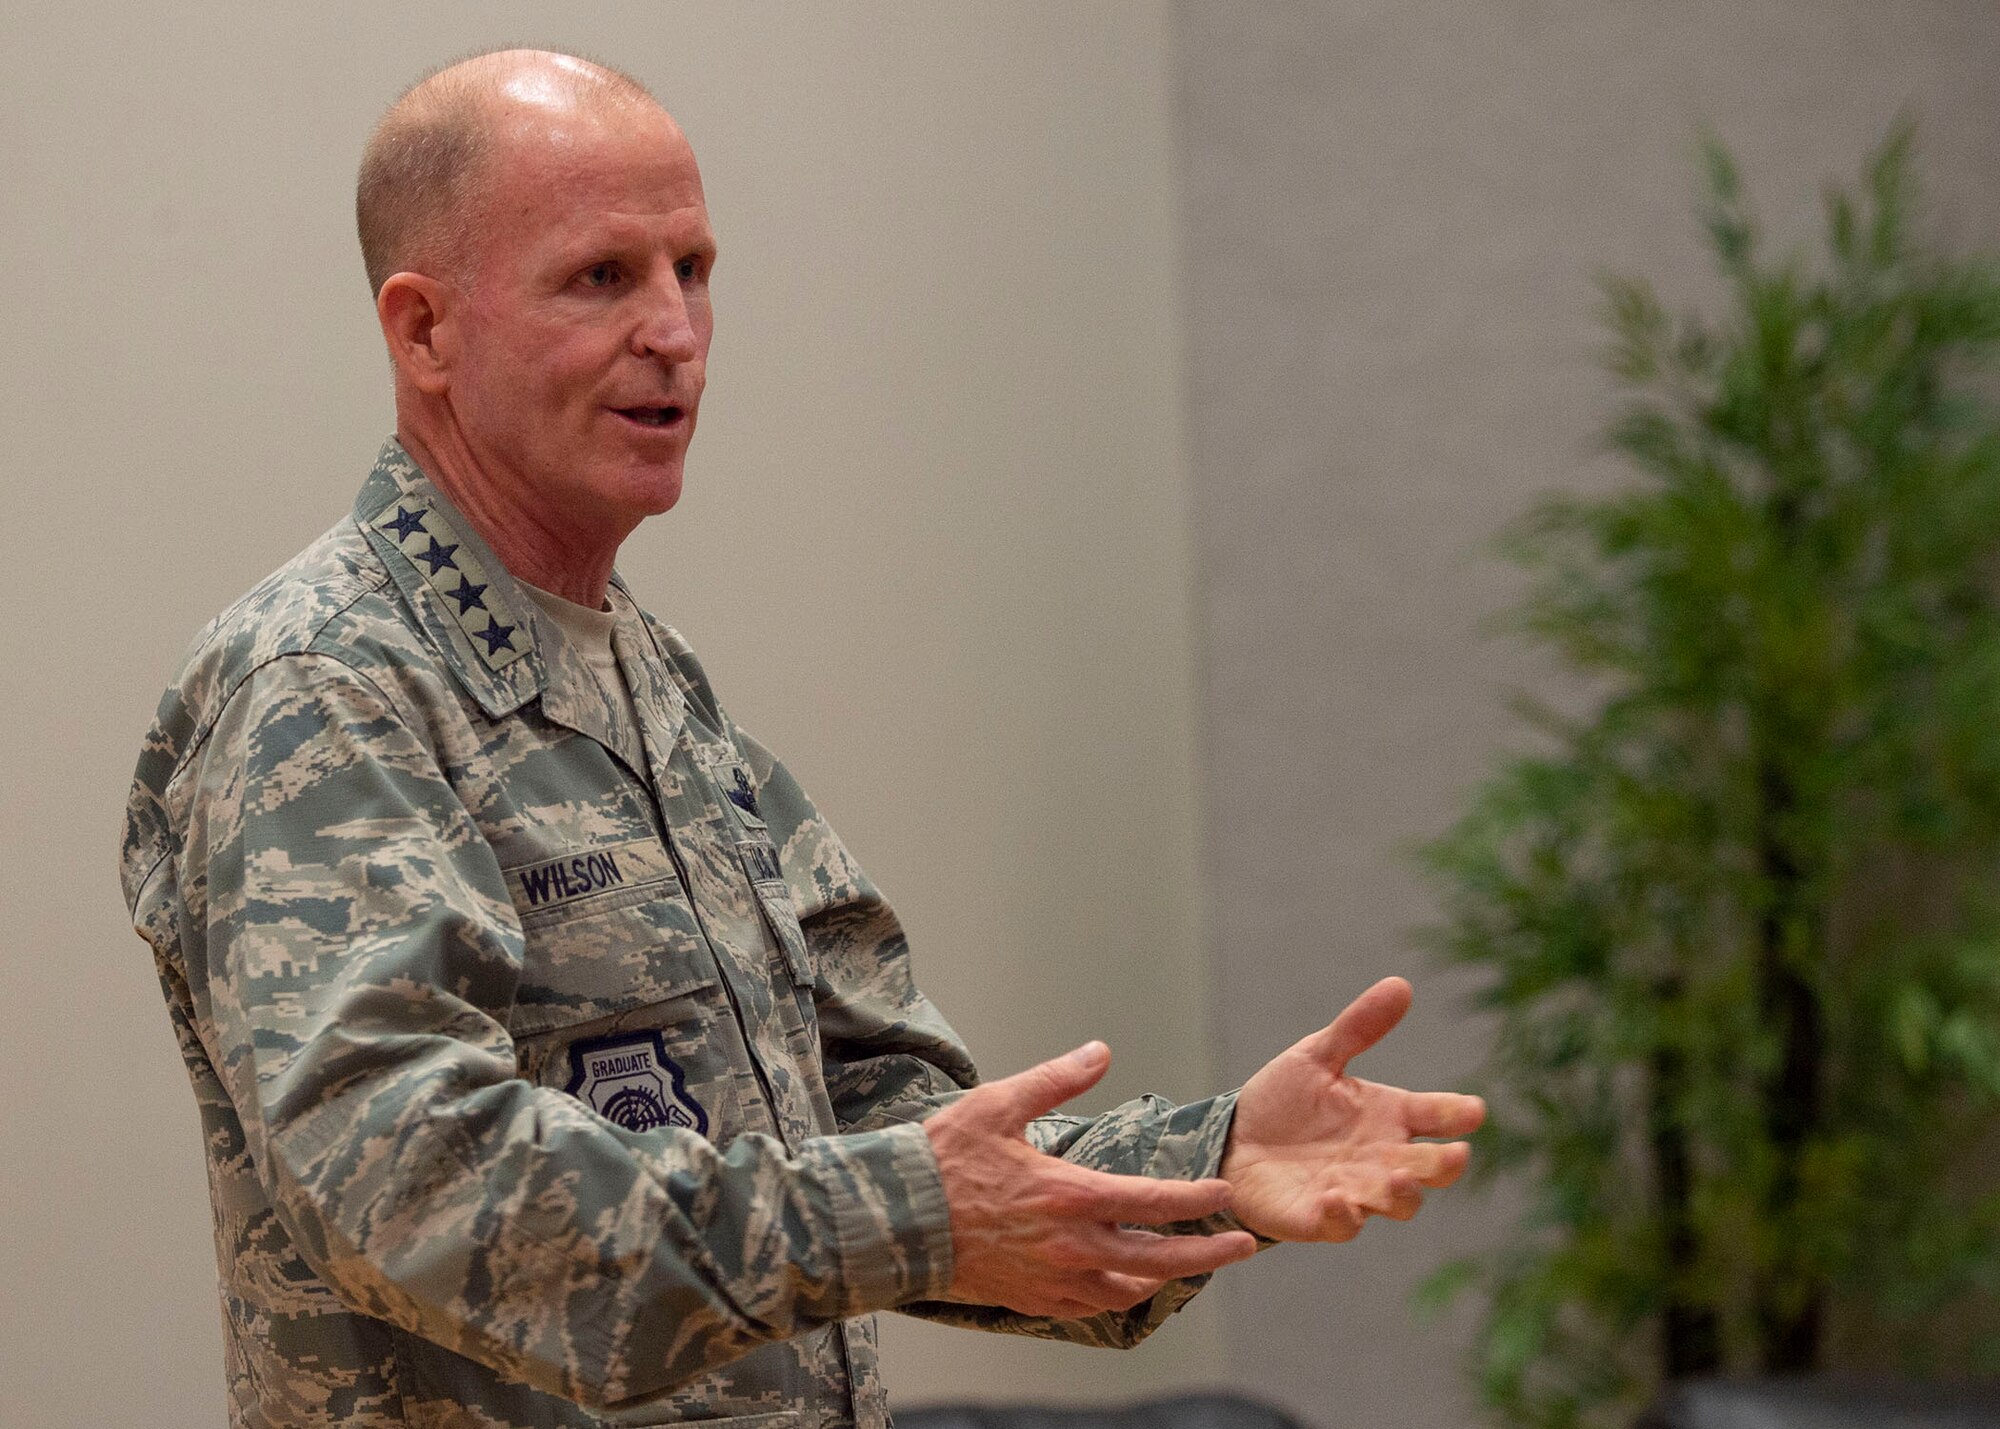 Air Force Vice Chief of Staff Gen. Stephen W. Wilson talks to squadron commanders, chiefs and first sergeants during his visit to the 15th Wing, Joint Base Pearl Harbor-Hickam, Hawaii, July 26, 2018. Wilson visited Airmen from around the 15th Wing after the Pacific Air Forces change of command ceremony to discuss the importance of modernization, readiness, innovation and revitalizing squadrons. (U.S. Air Force photo by Tech. Sgt. Heather Redman)